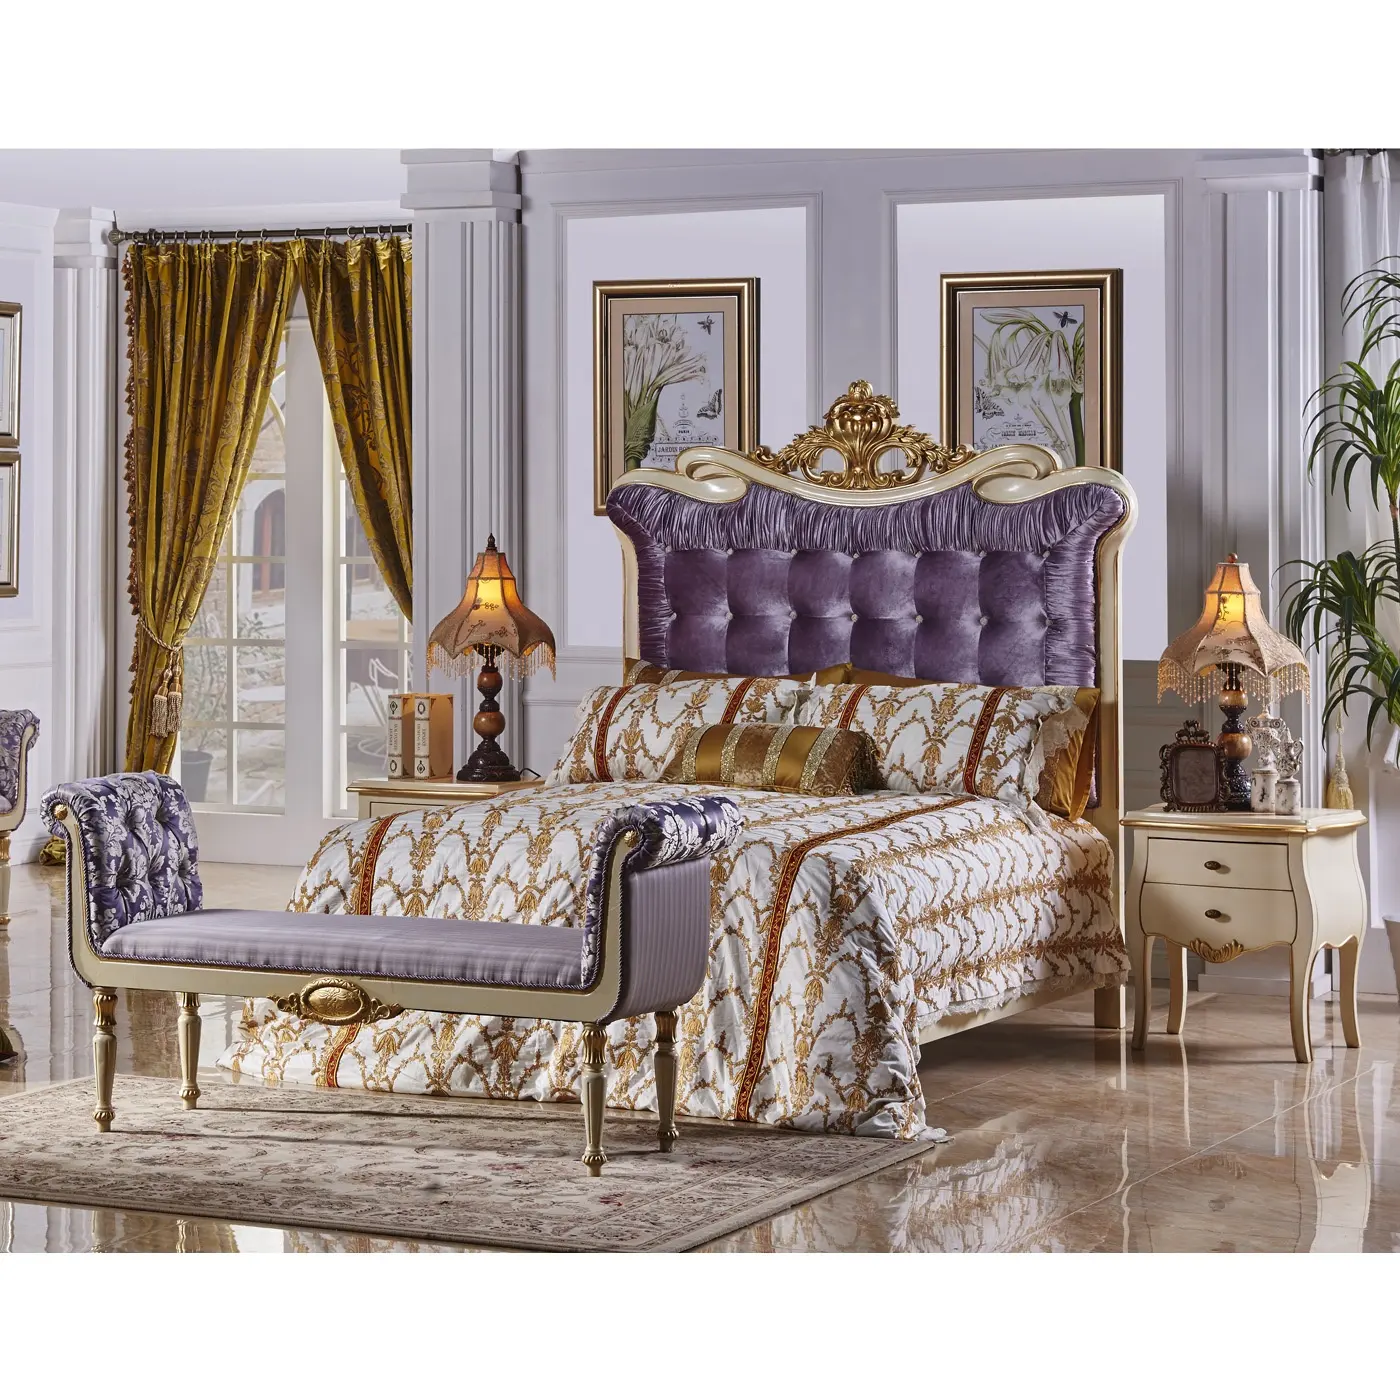 Luxury Italian classic high quality 1.5m single bed set furniture bedroom products